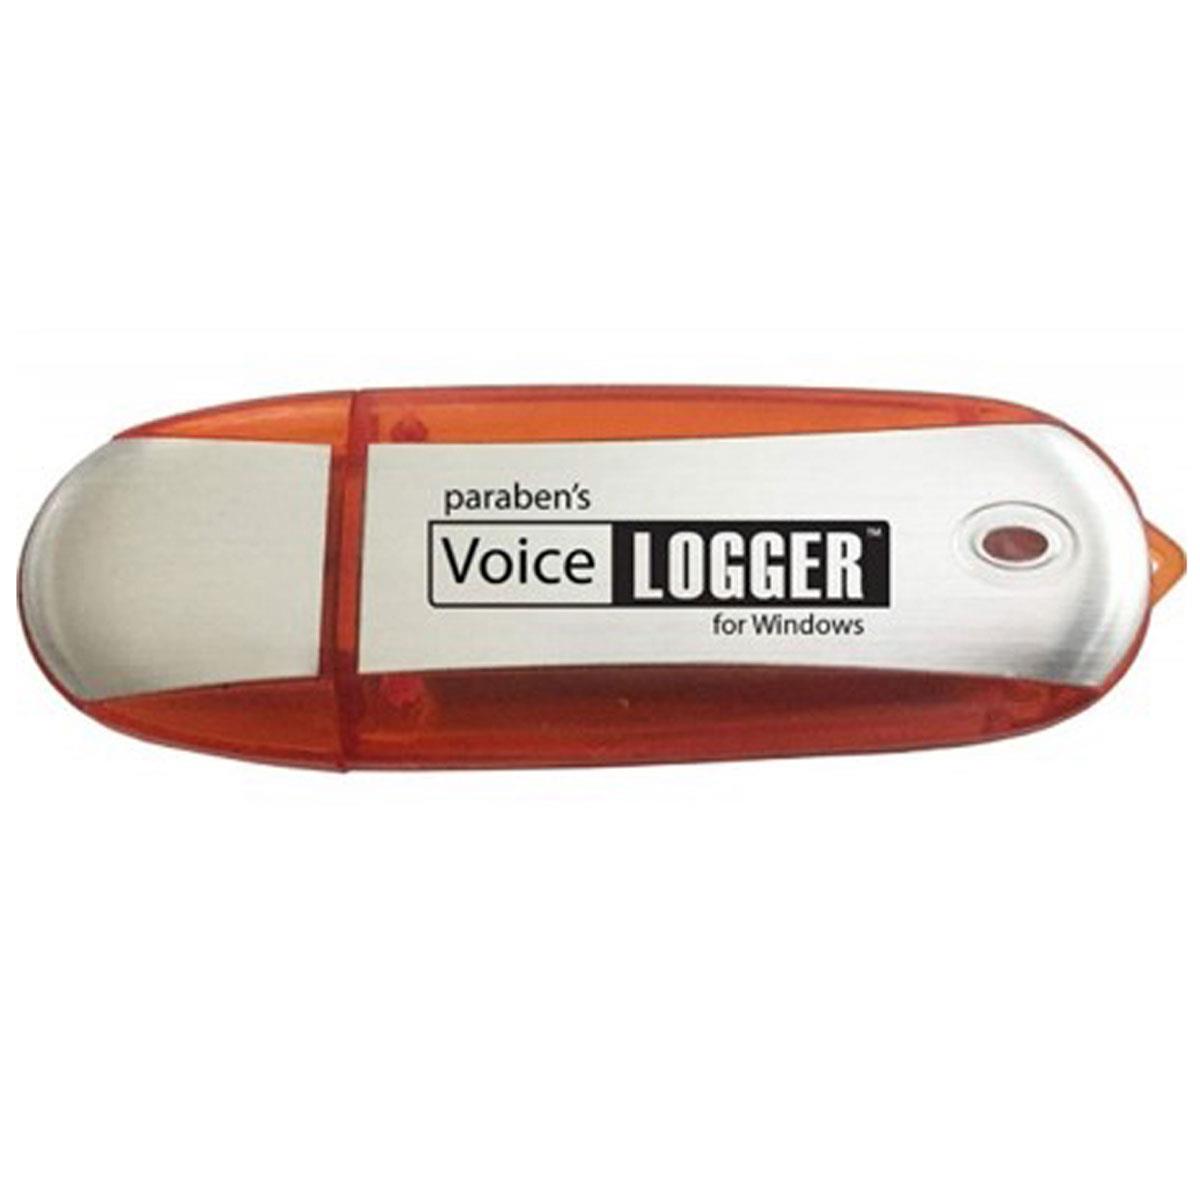 Image of Paraben Voice Logger Covert Computer Voice Recorder for Windows